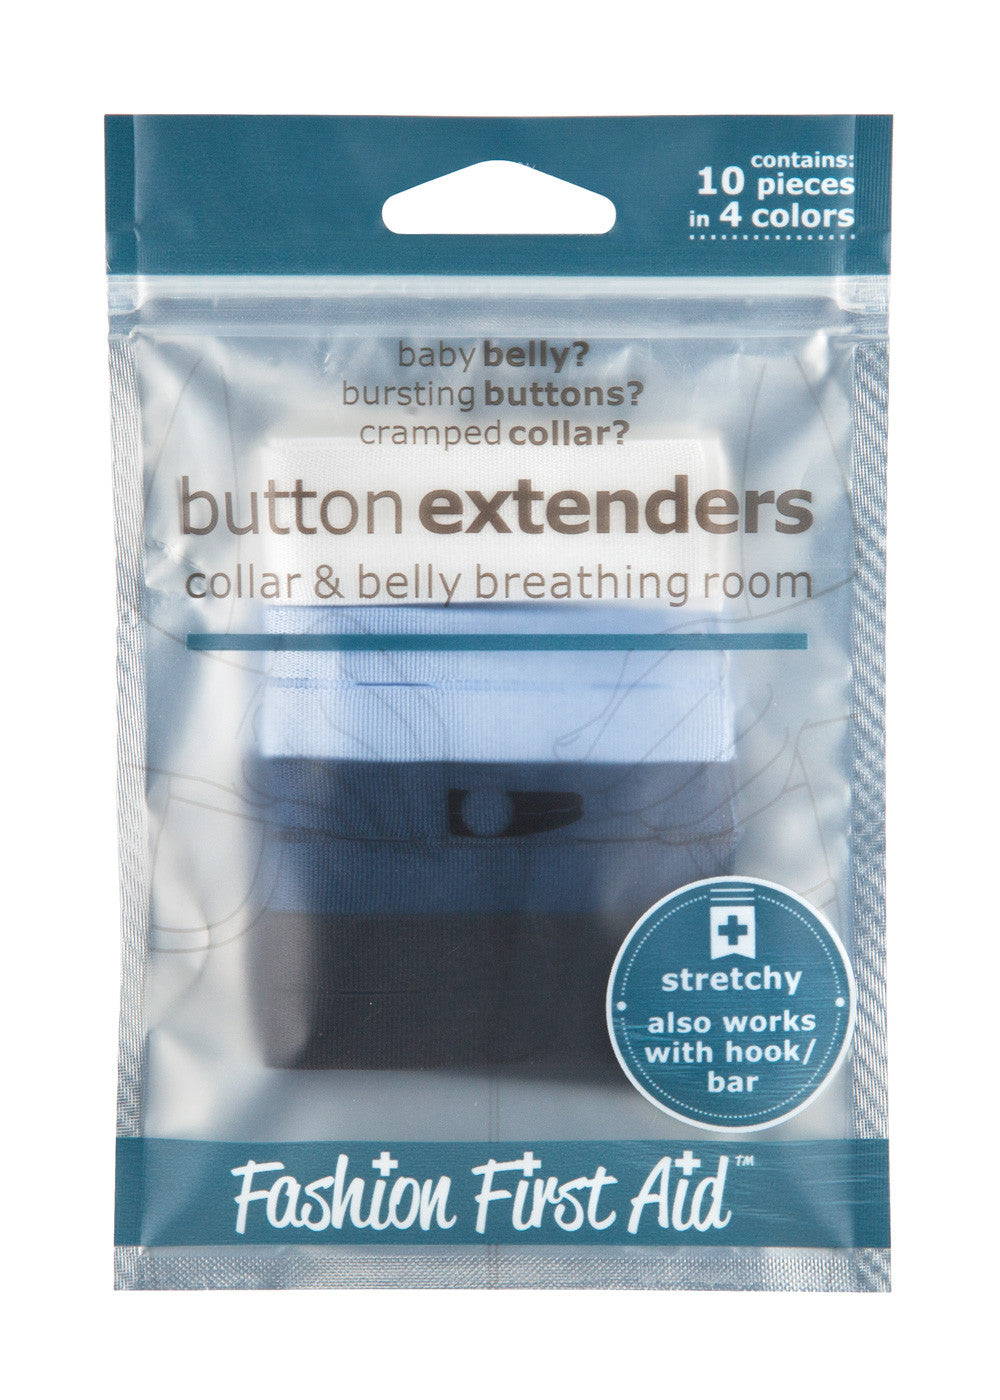 Button Extenders- Breathing room for pants and collars